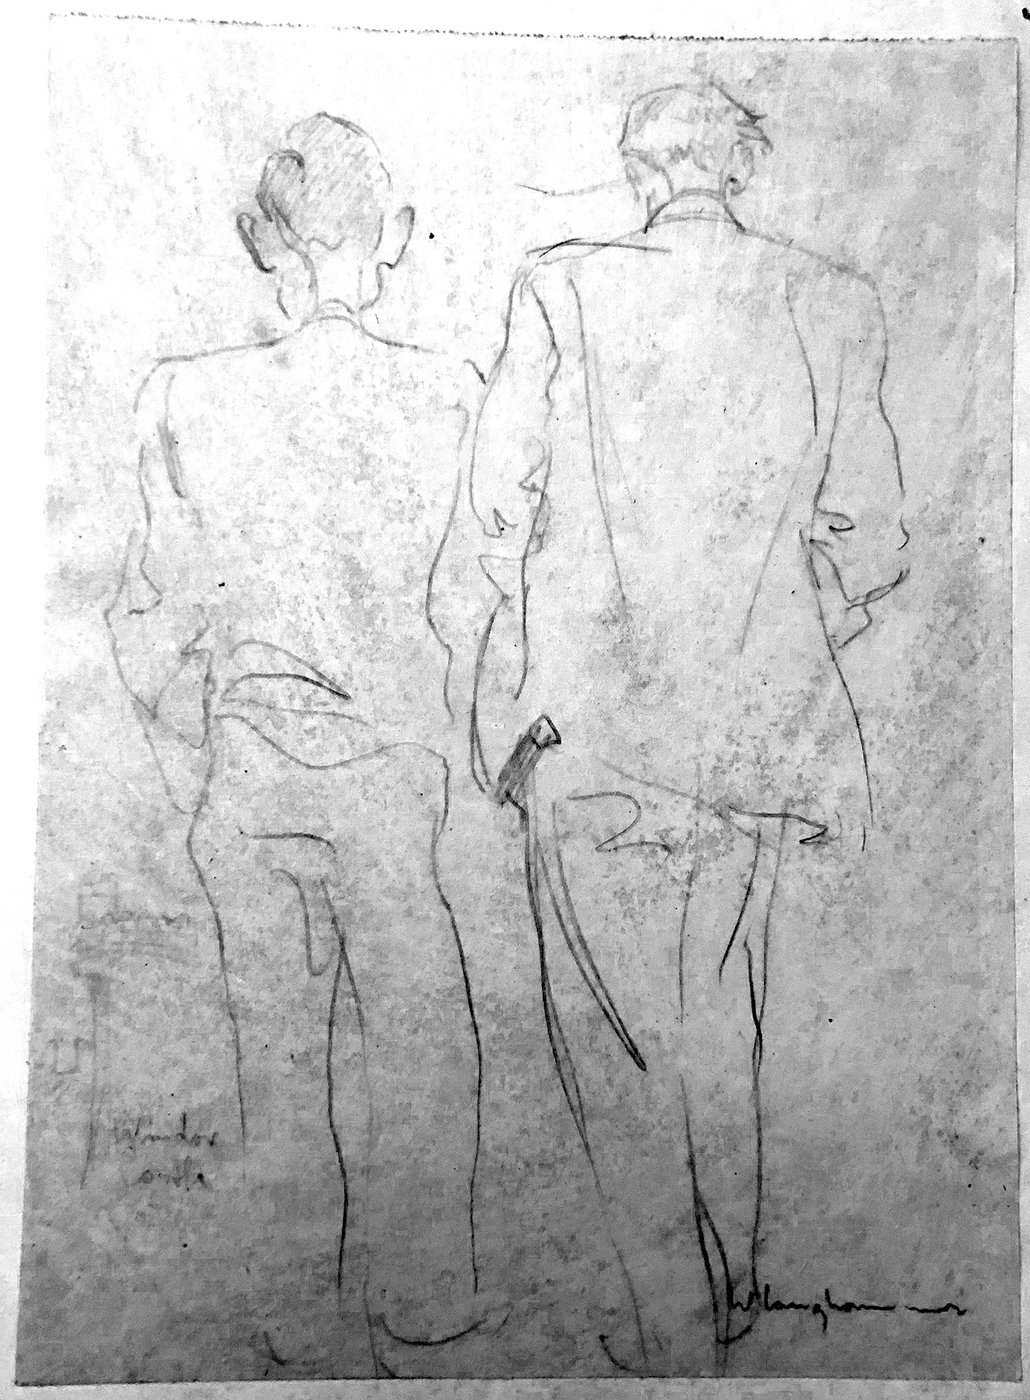 The upright-format drawing shows a back view of two men, the one on the right being taller, standing in casual suits.